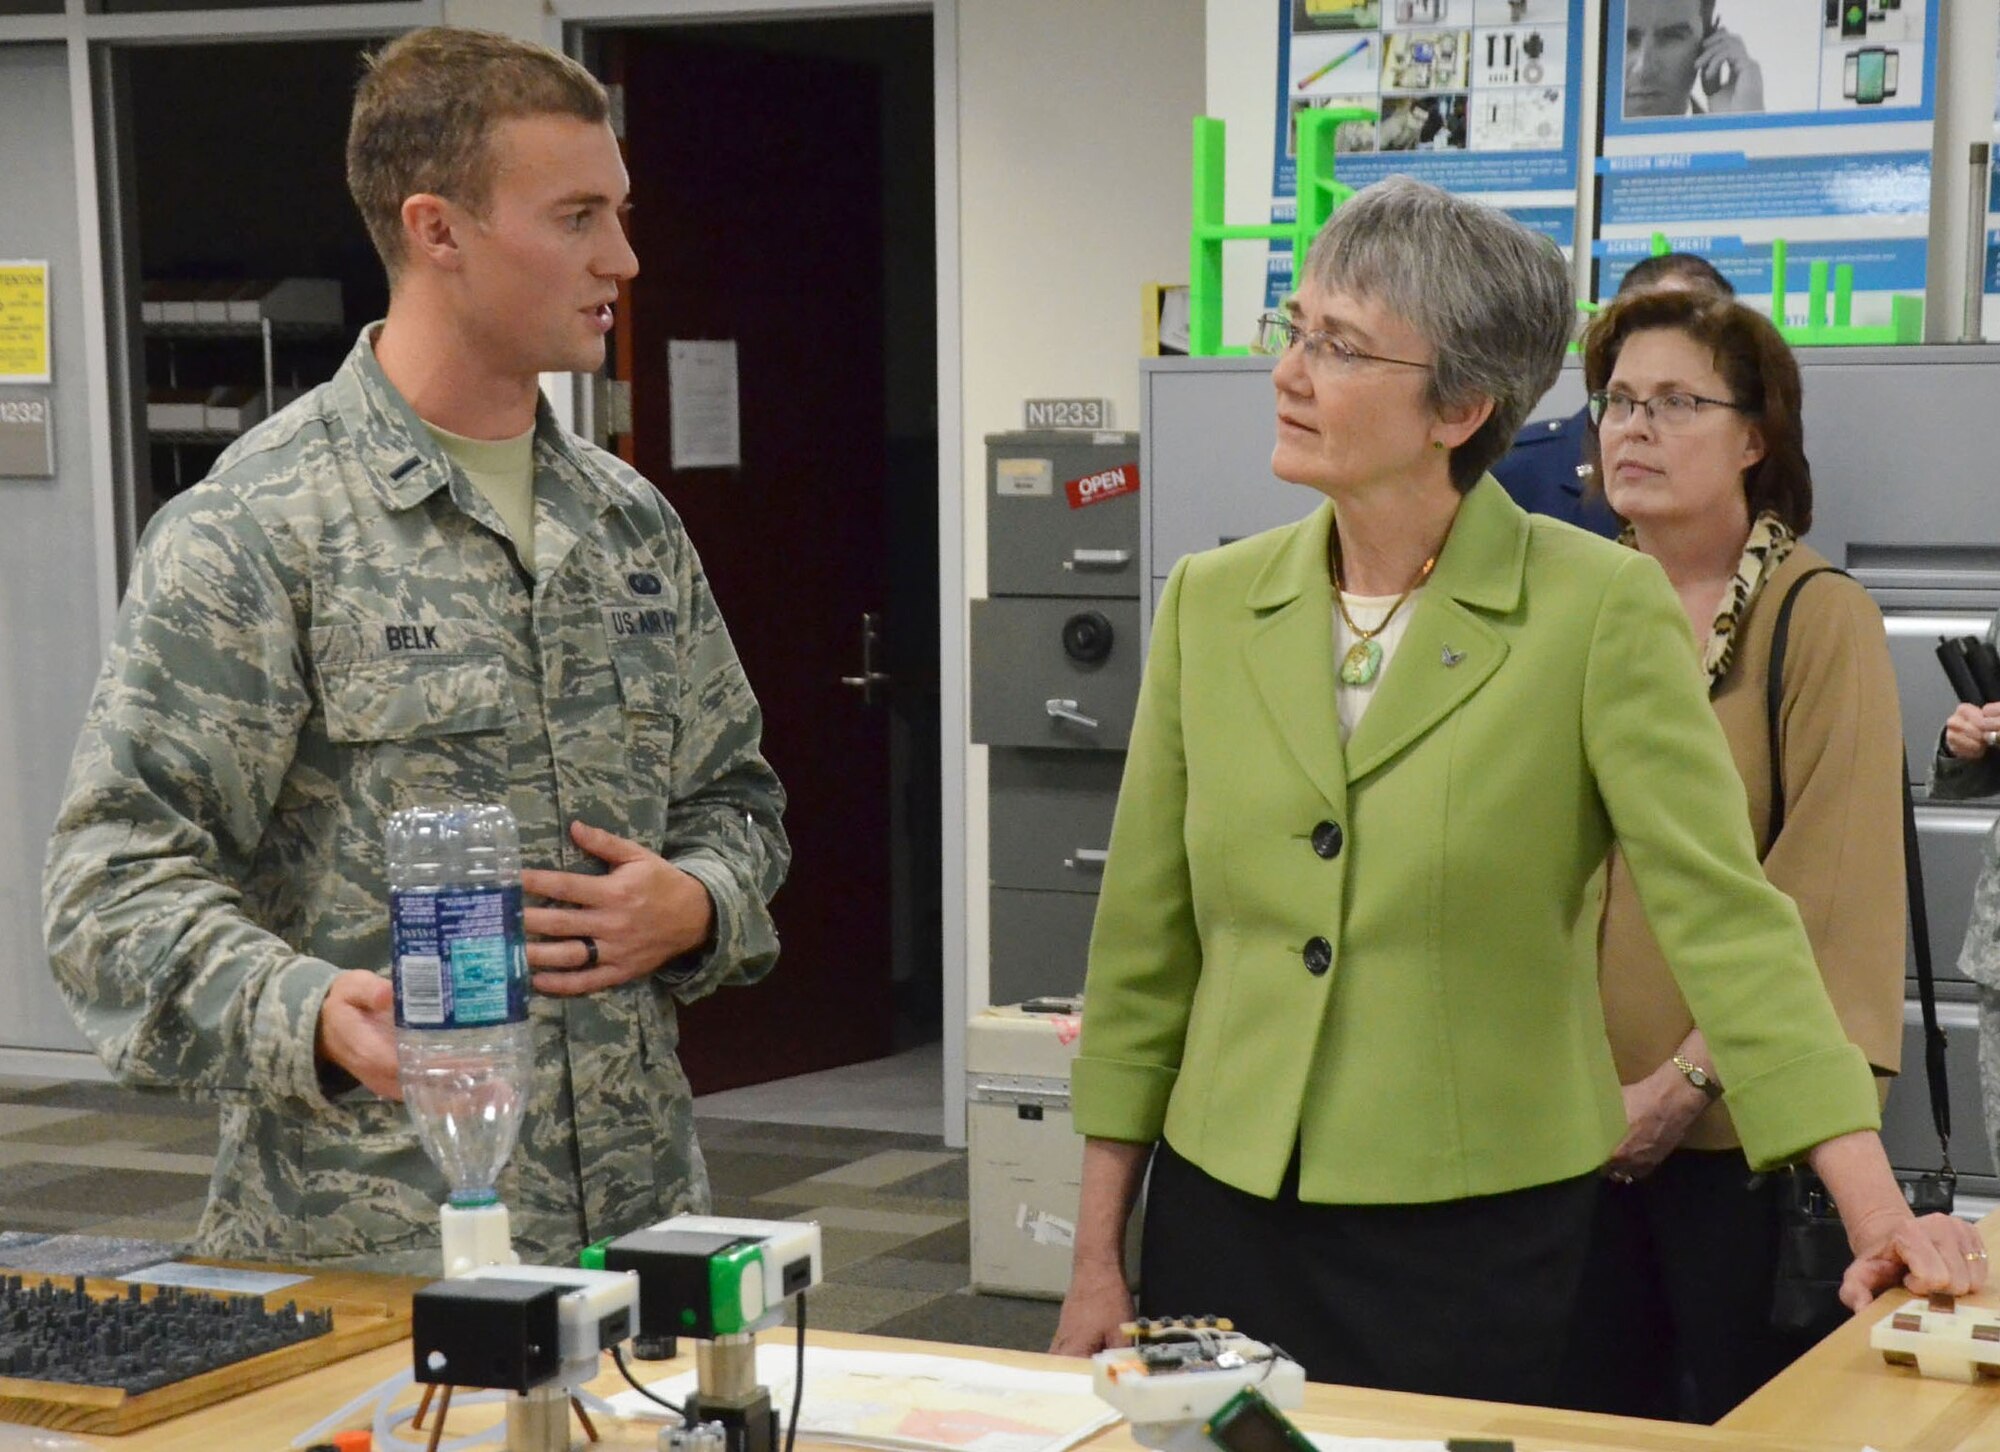 First Lt. Drew Belk, Innovation Lab chief at the Air Force Technical Applications Center, Patrick AFB, Fla., discusses ongoing innovation projects with Secretary of the Air Force Heather Wilson during her visit to the Department of Defense’s sole nuclear treaty monitoring center.  Wilson was in town to speak at AFTAC’s annual Women in Science and Engineering Symposium Feb. 8, 2018.  (U.S. Air Force photo by William M. Donelson)